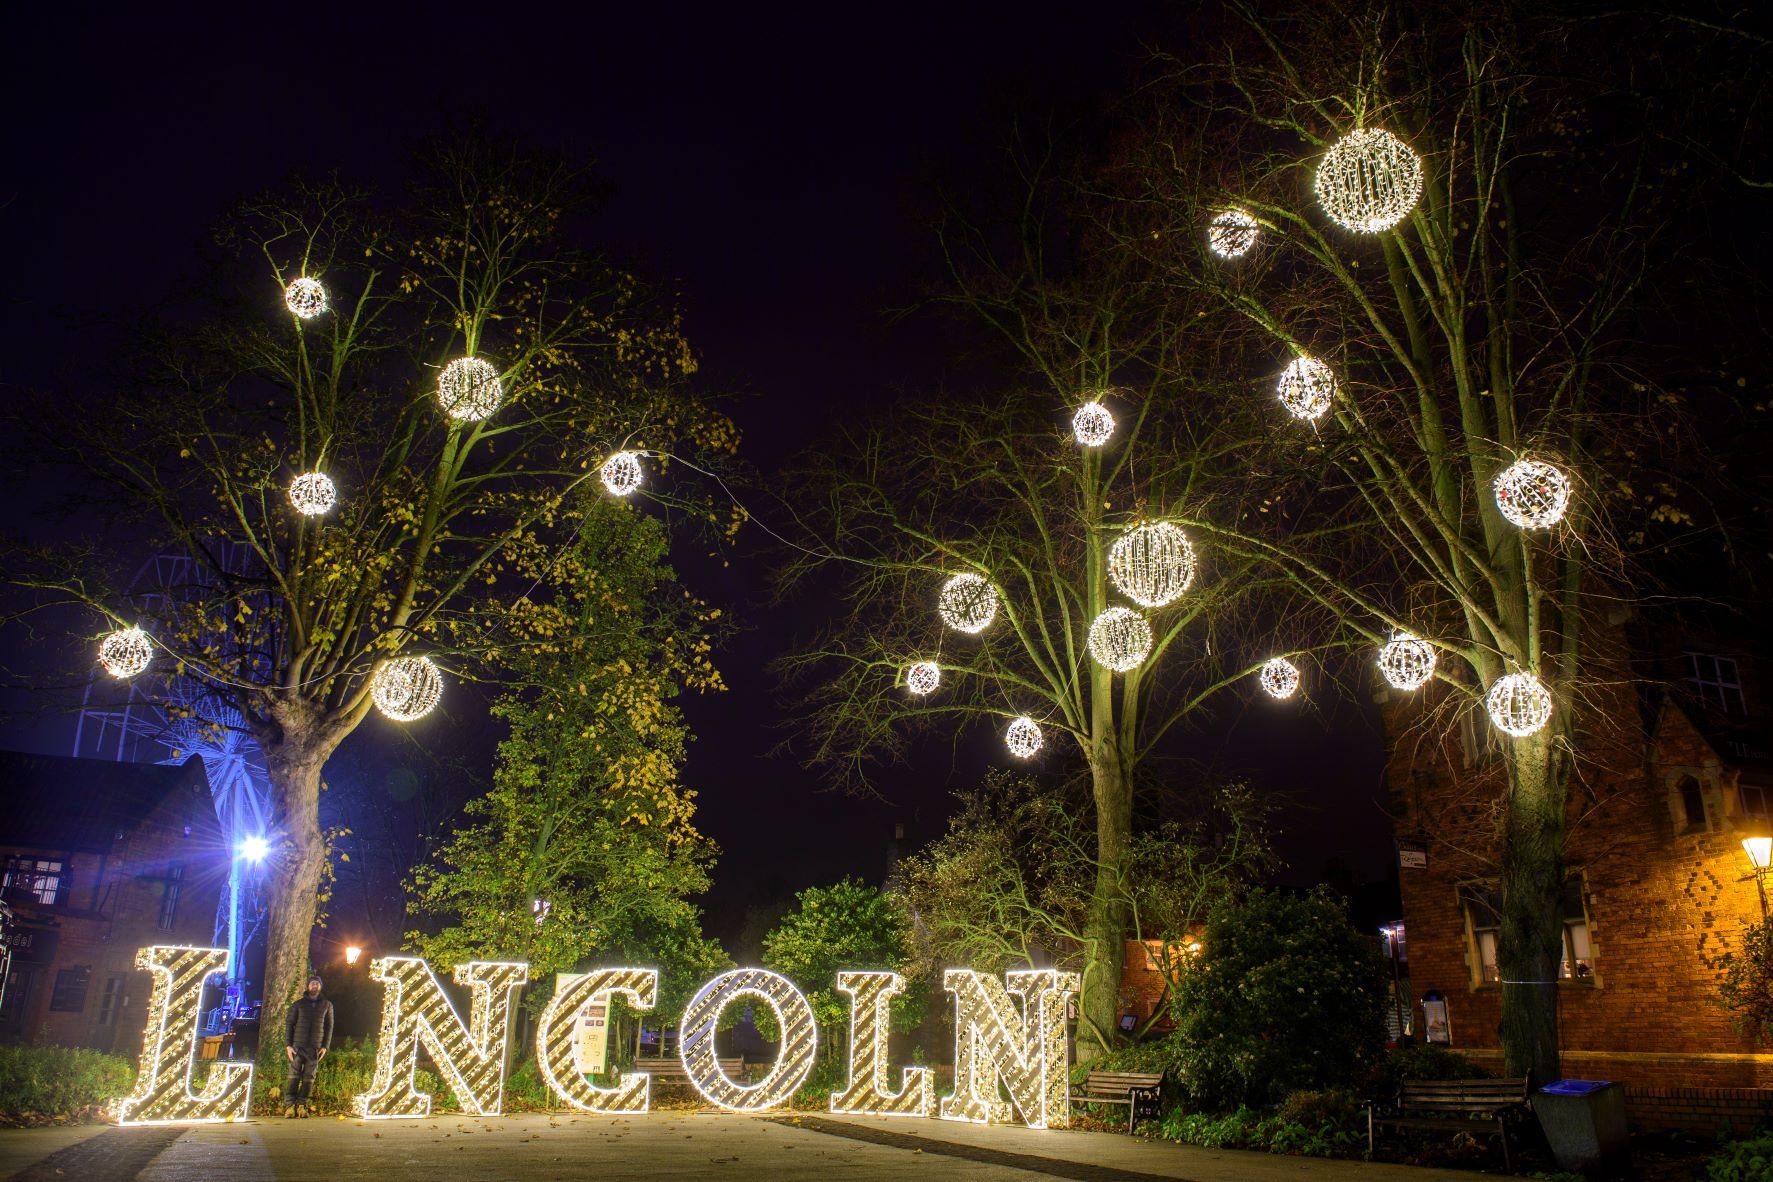 Light-up Lincoln selfie-point by Fizzco Projects displayed in Lincoln City Centre for the Christmas period.